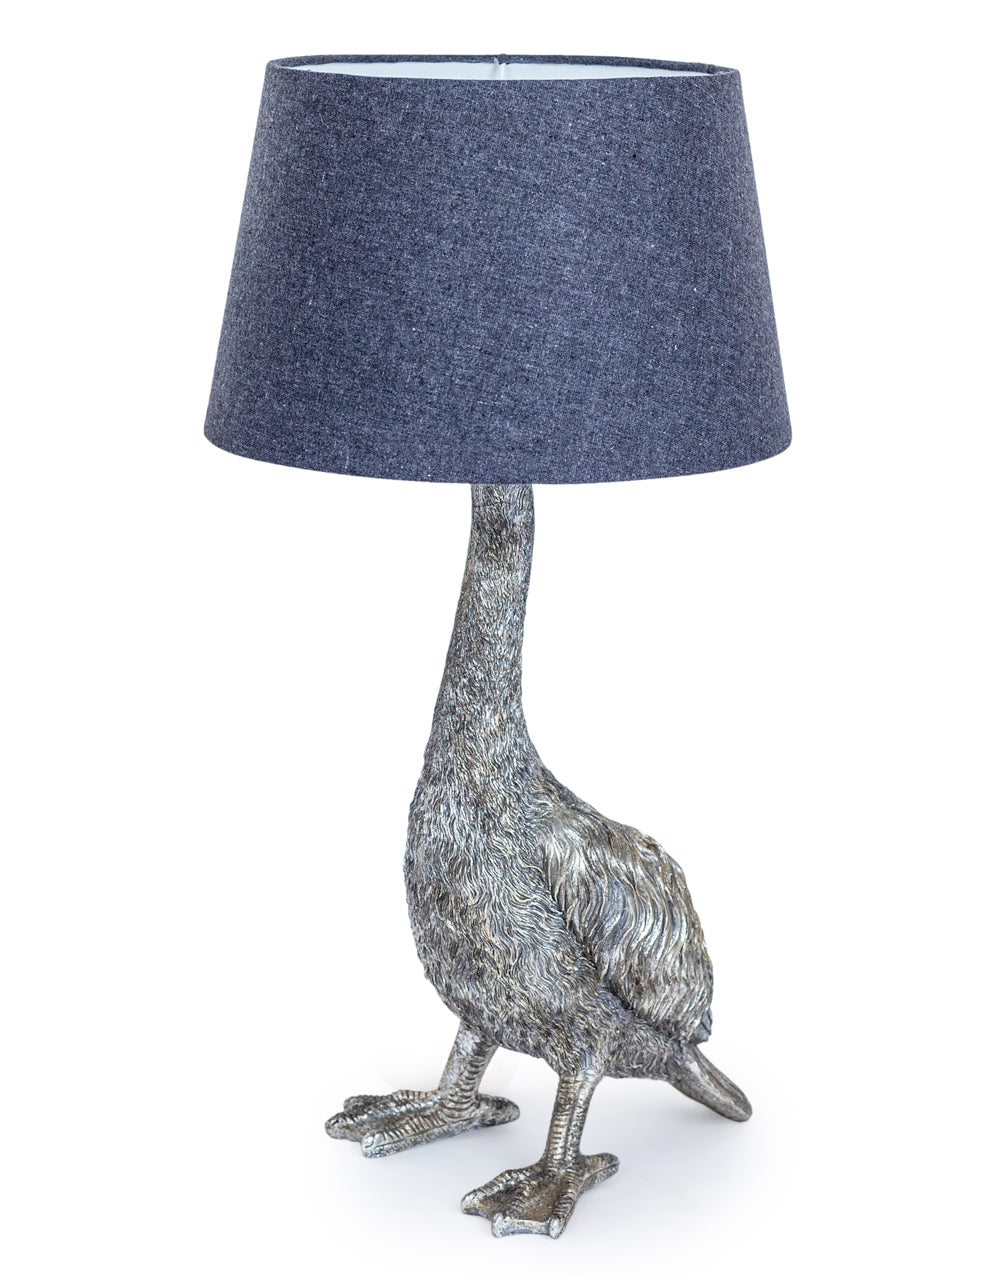 Antique Silver Goose Table Lamp with Grey Shade